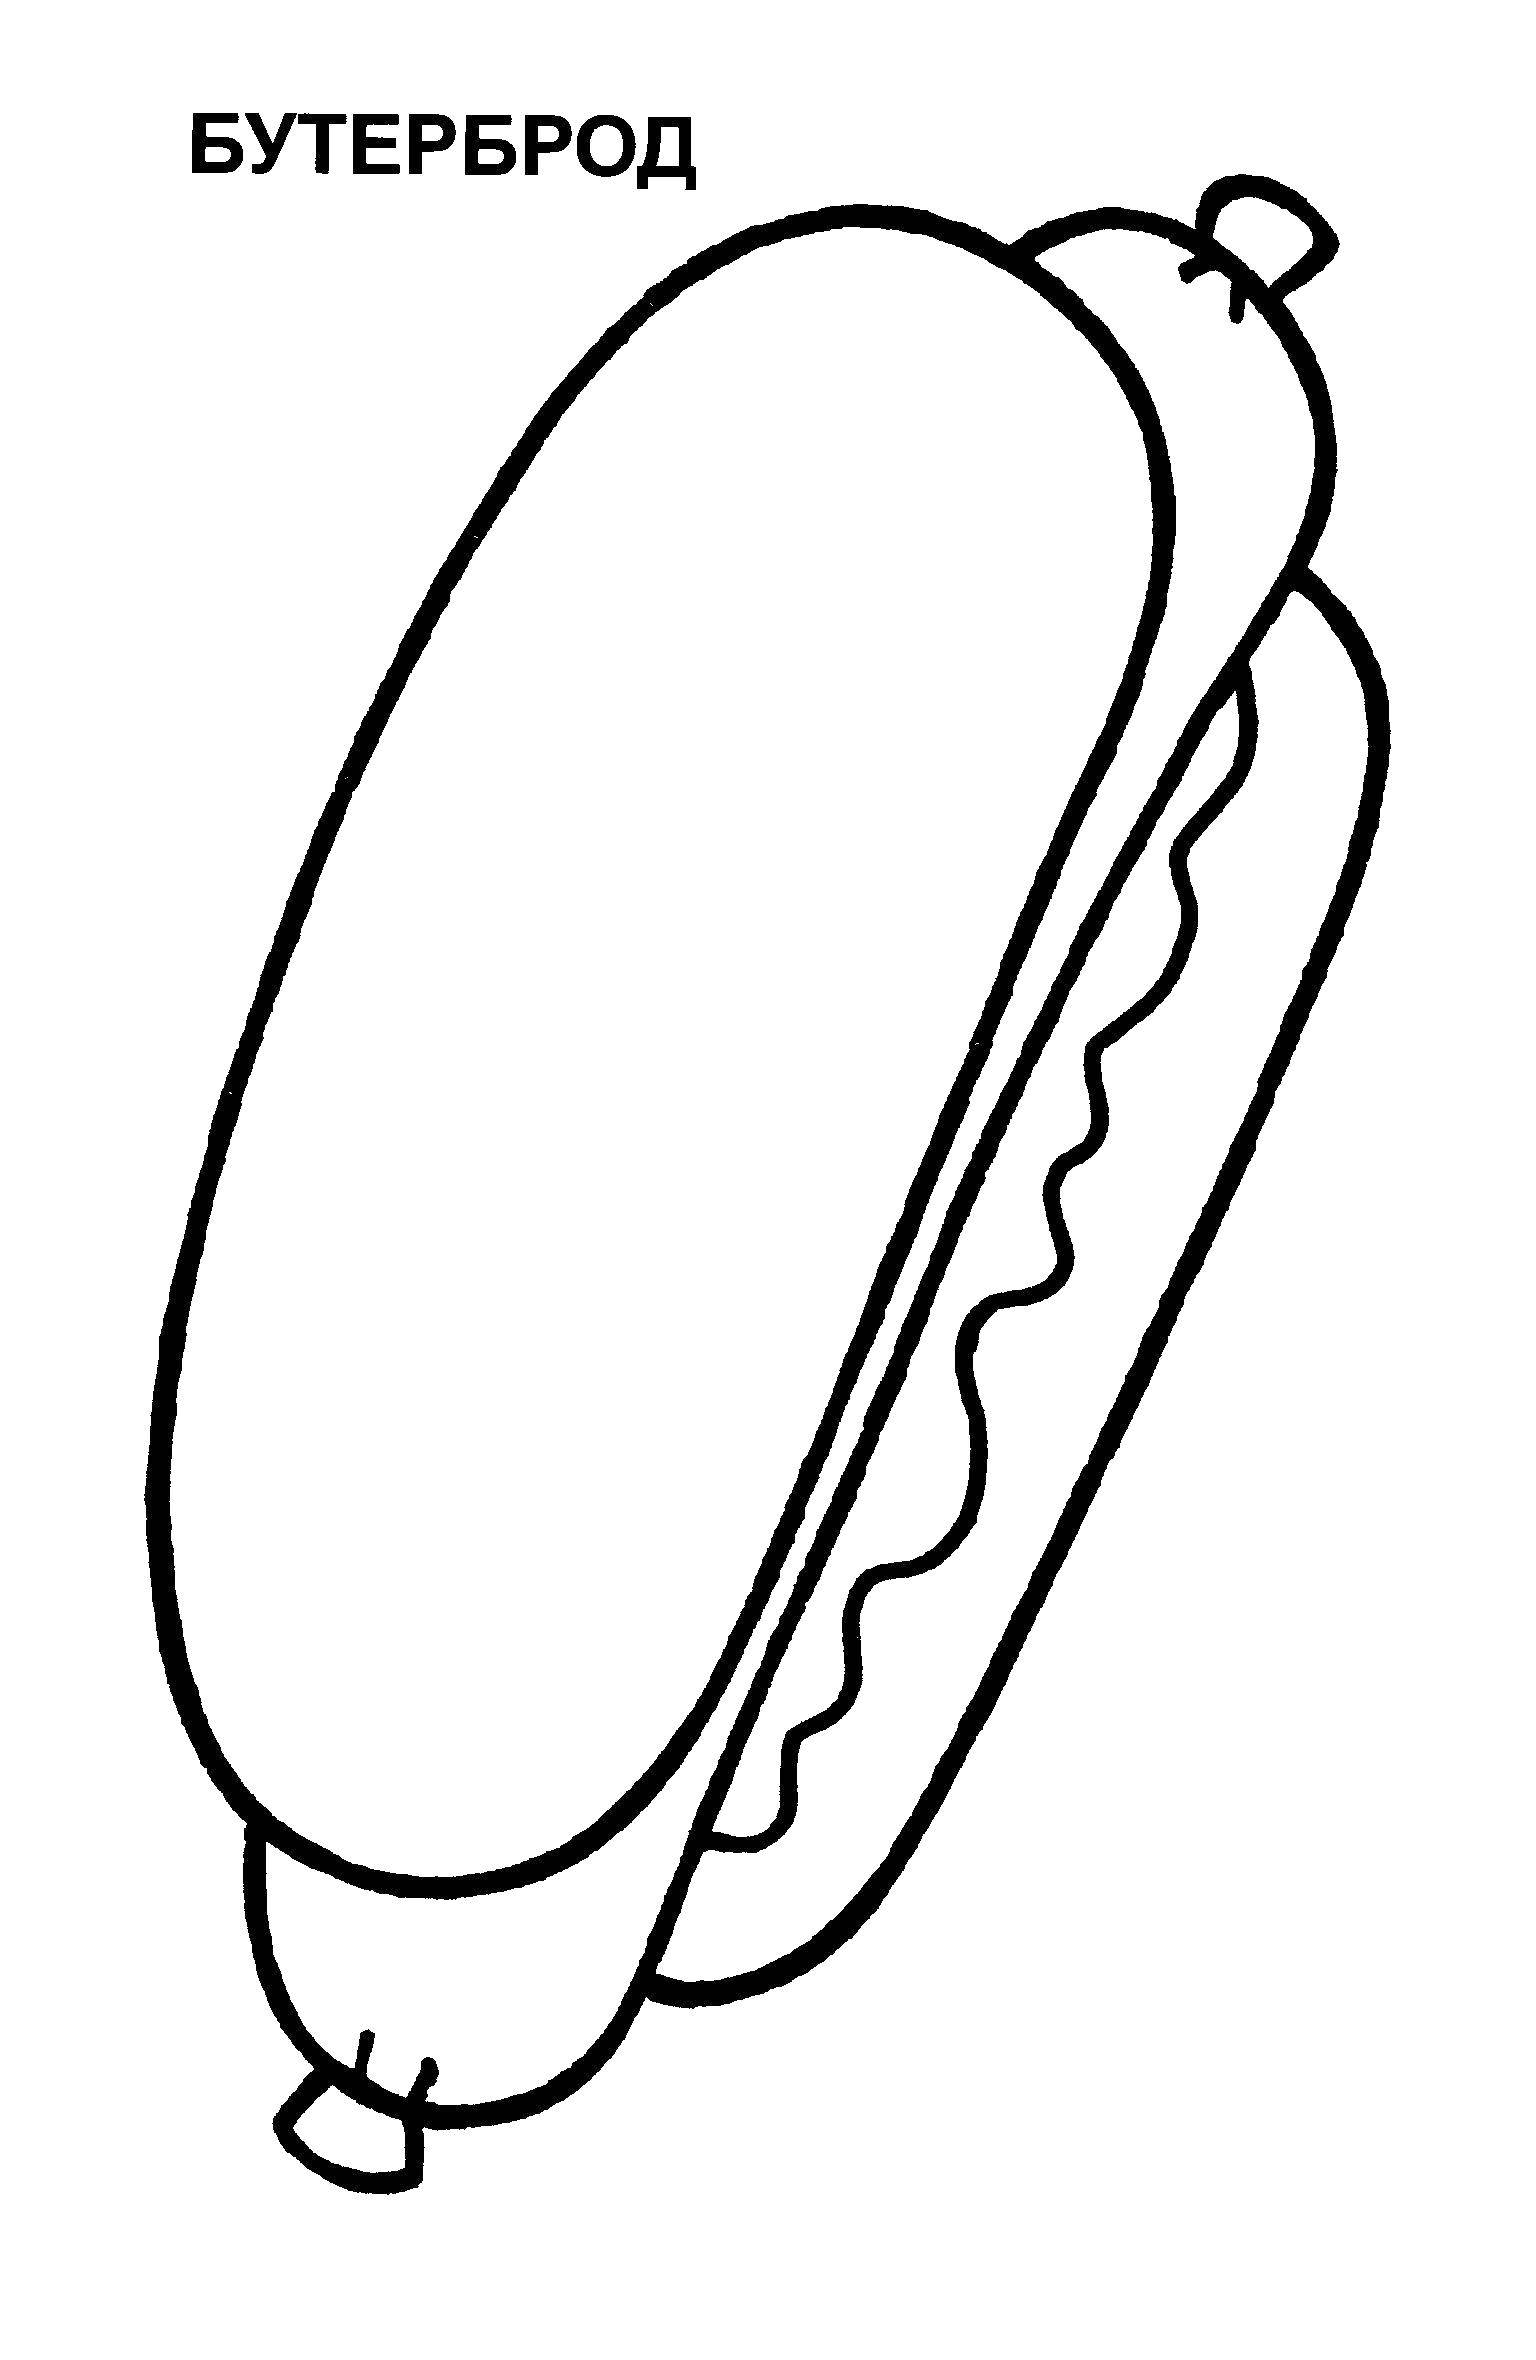 Coloring Sandwich. Category The food. Tags:  sandwich, food.